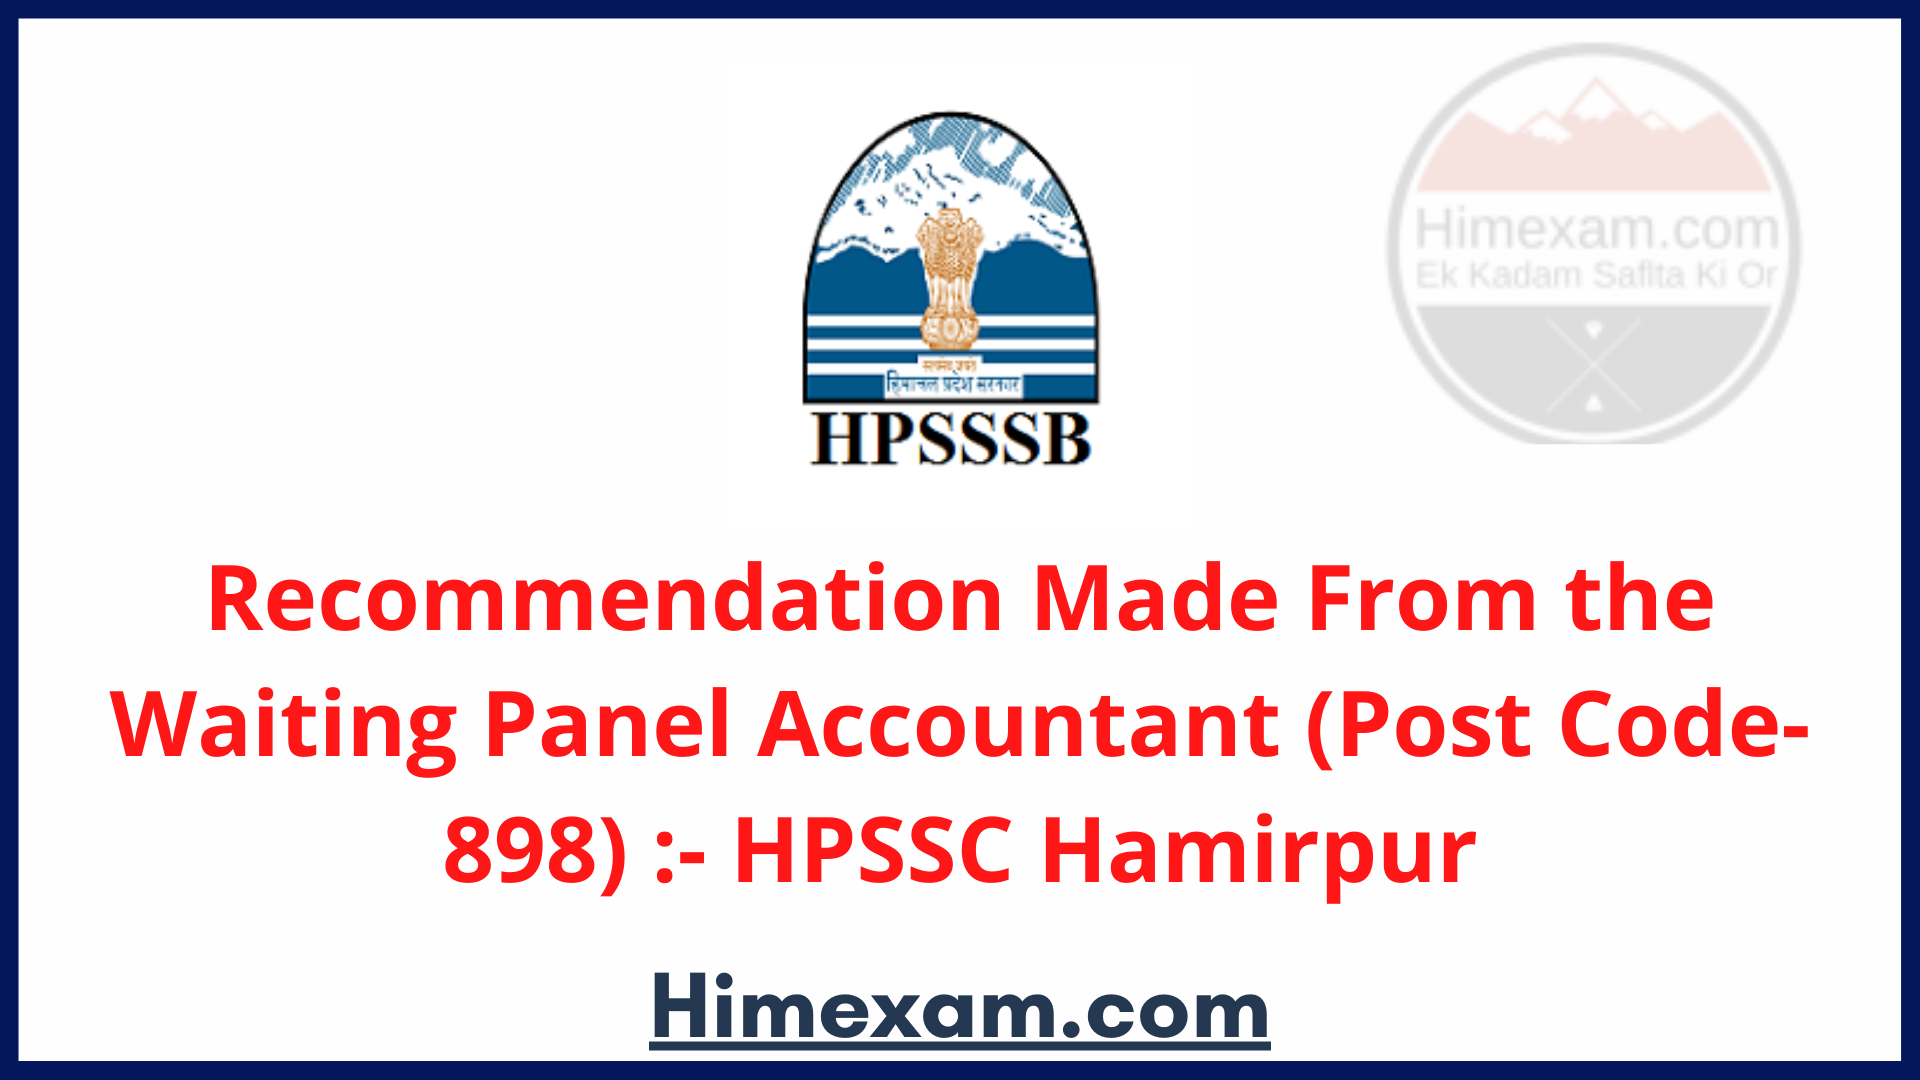 Recommendation Made From the Waiting Panel Accountant (Post Code-898) :- HPSSC Hamirpur